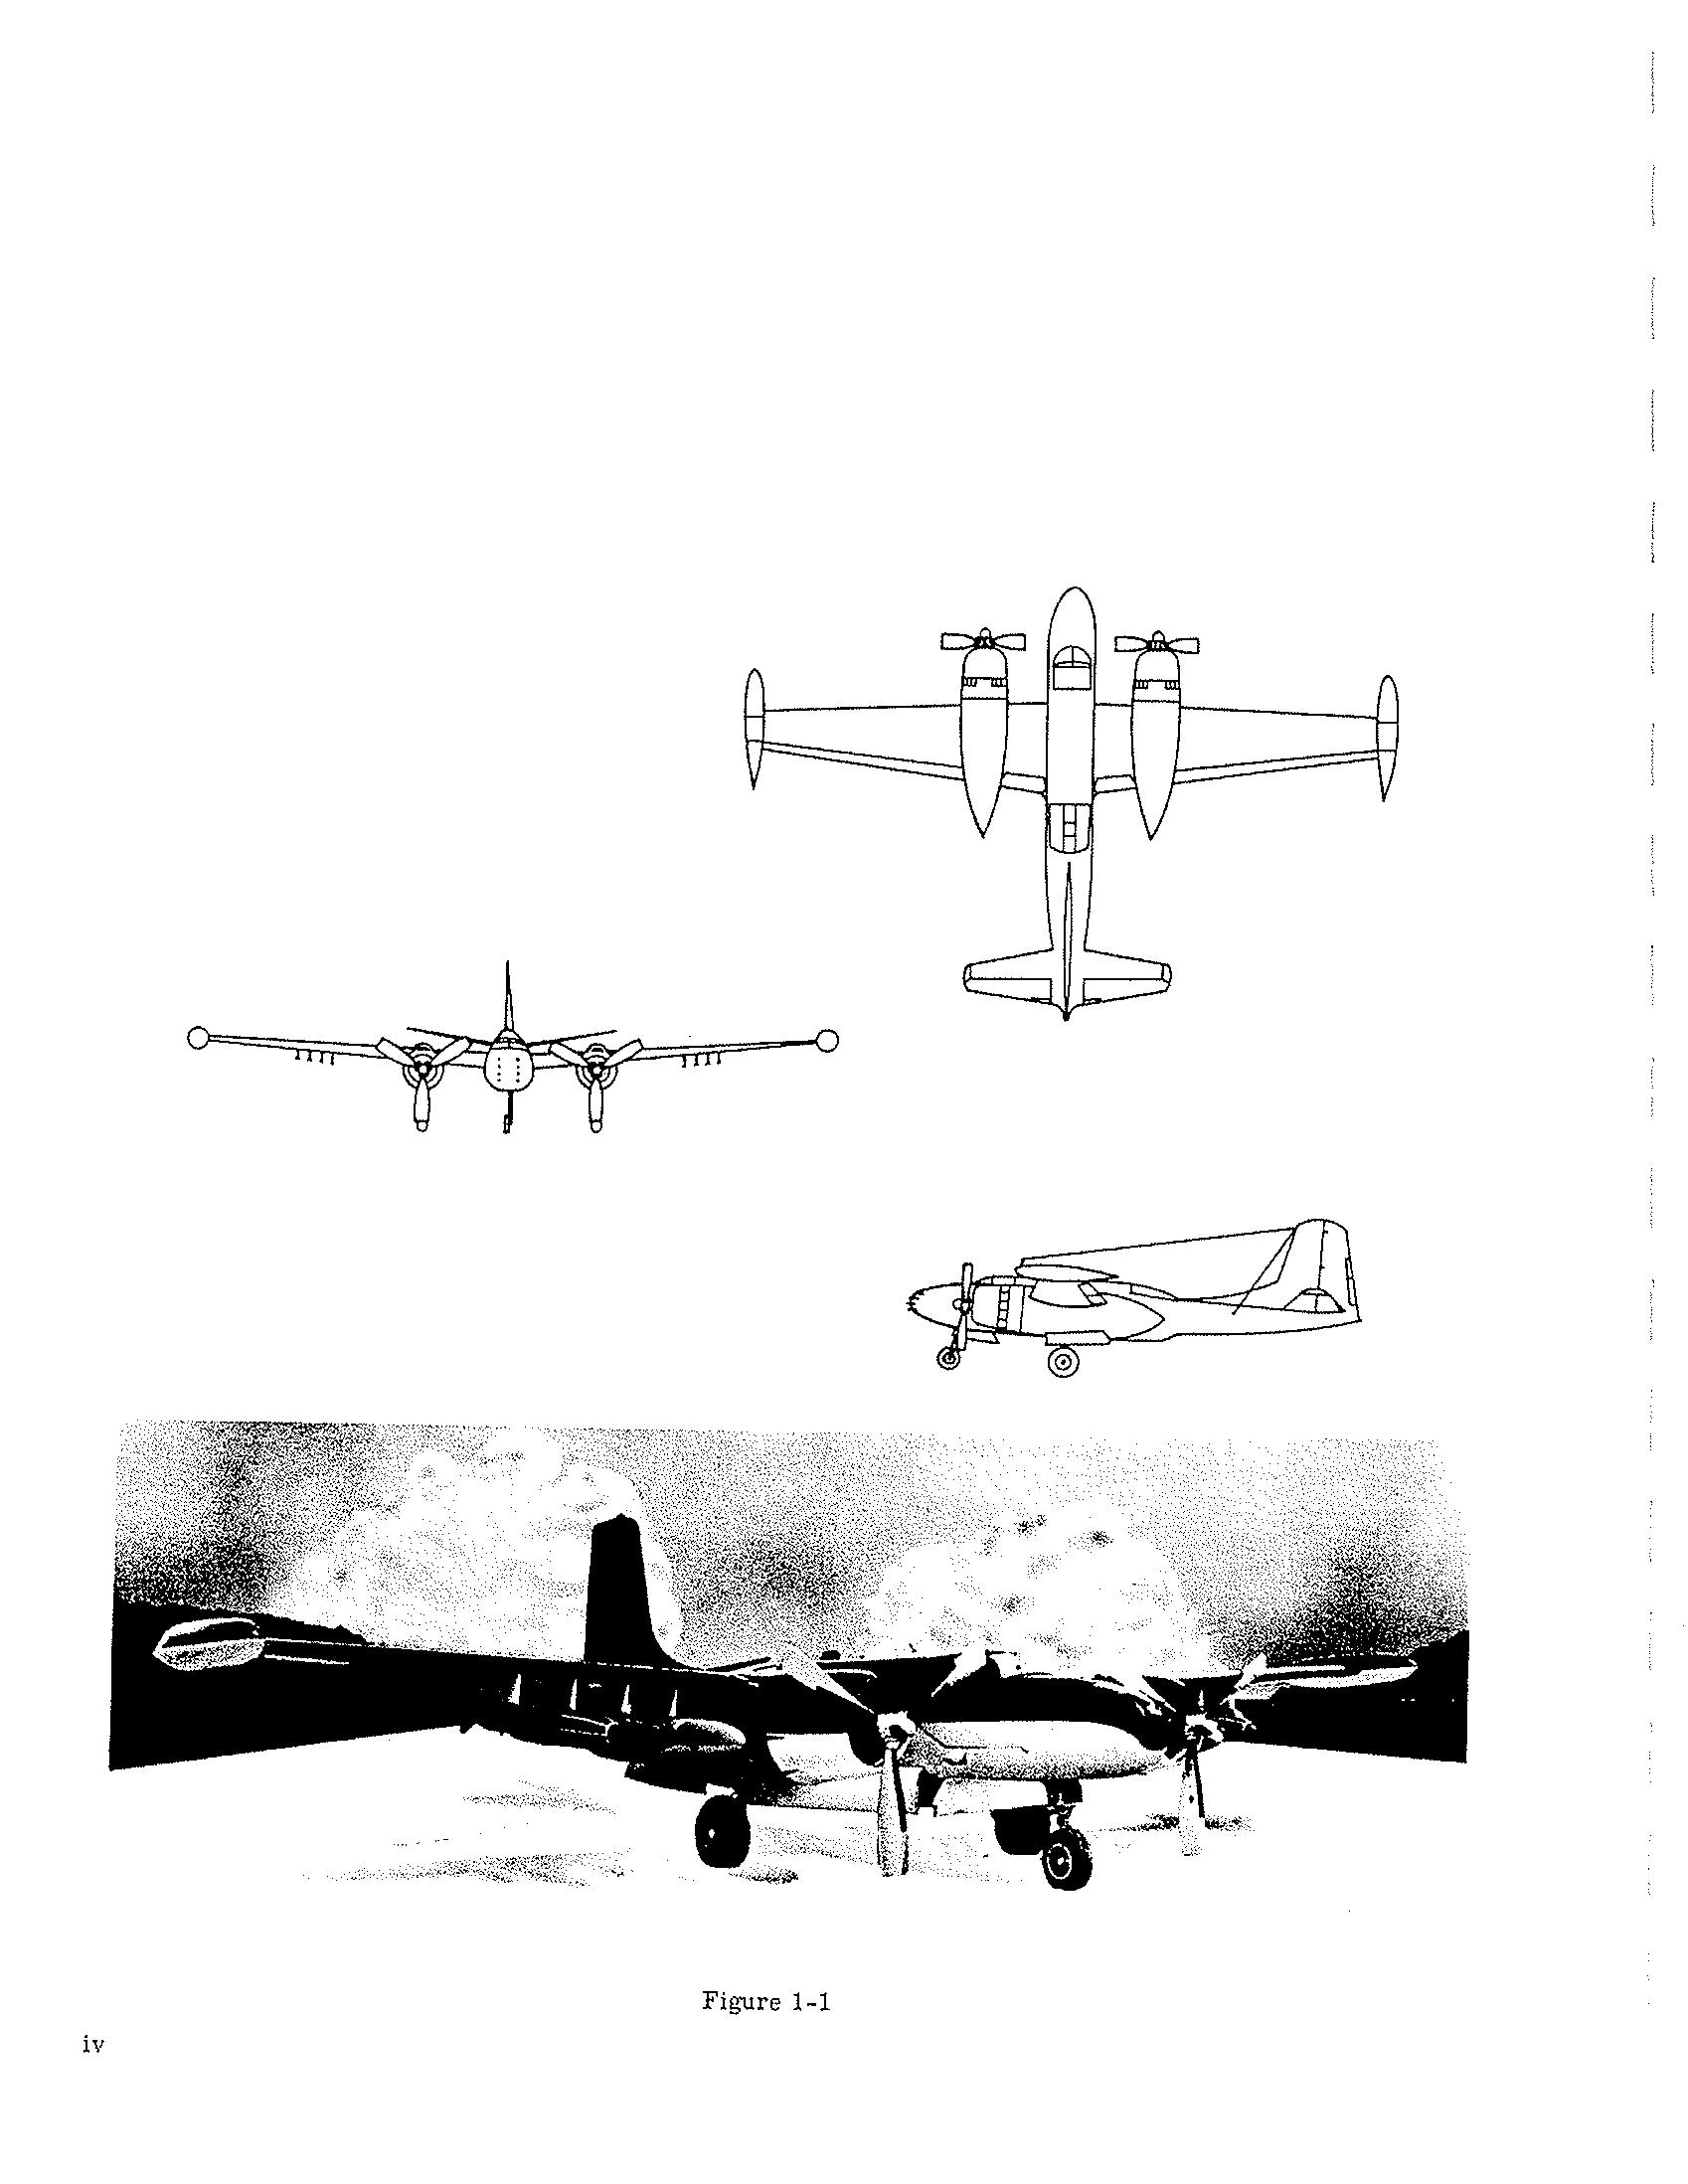 Sample page 8 from AirCorps Library document: Flight Manual for USAF Series A-26A Aircraft